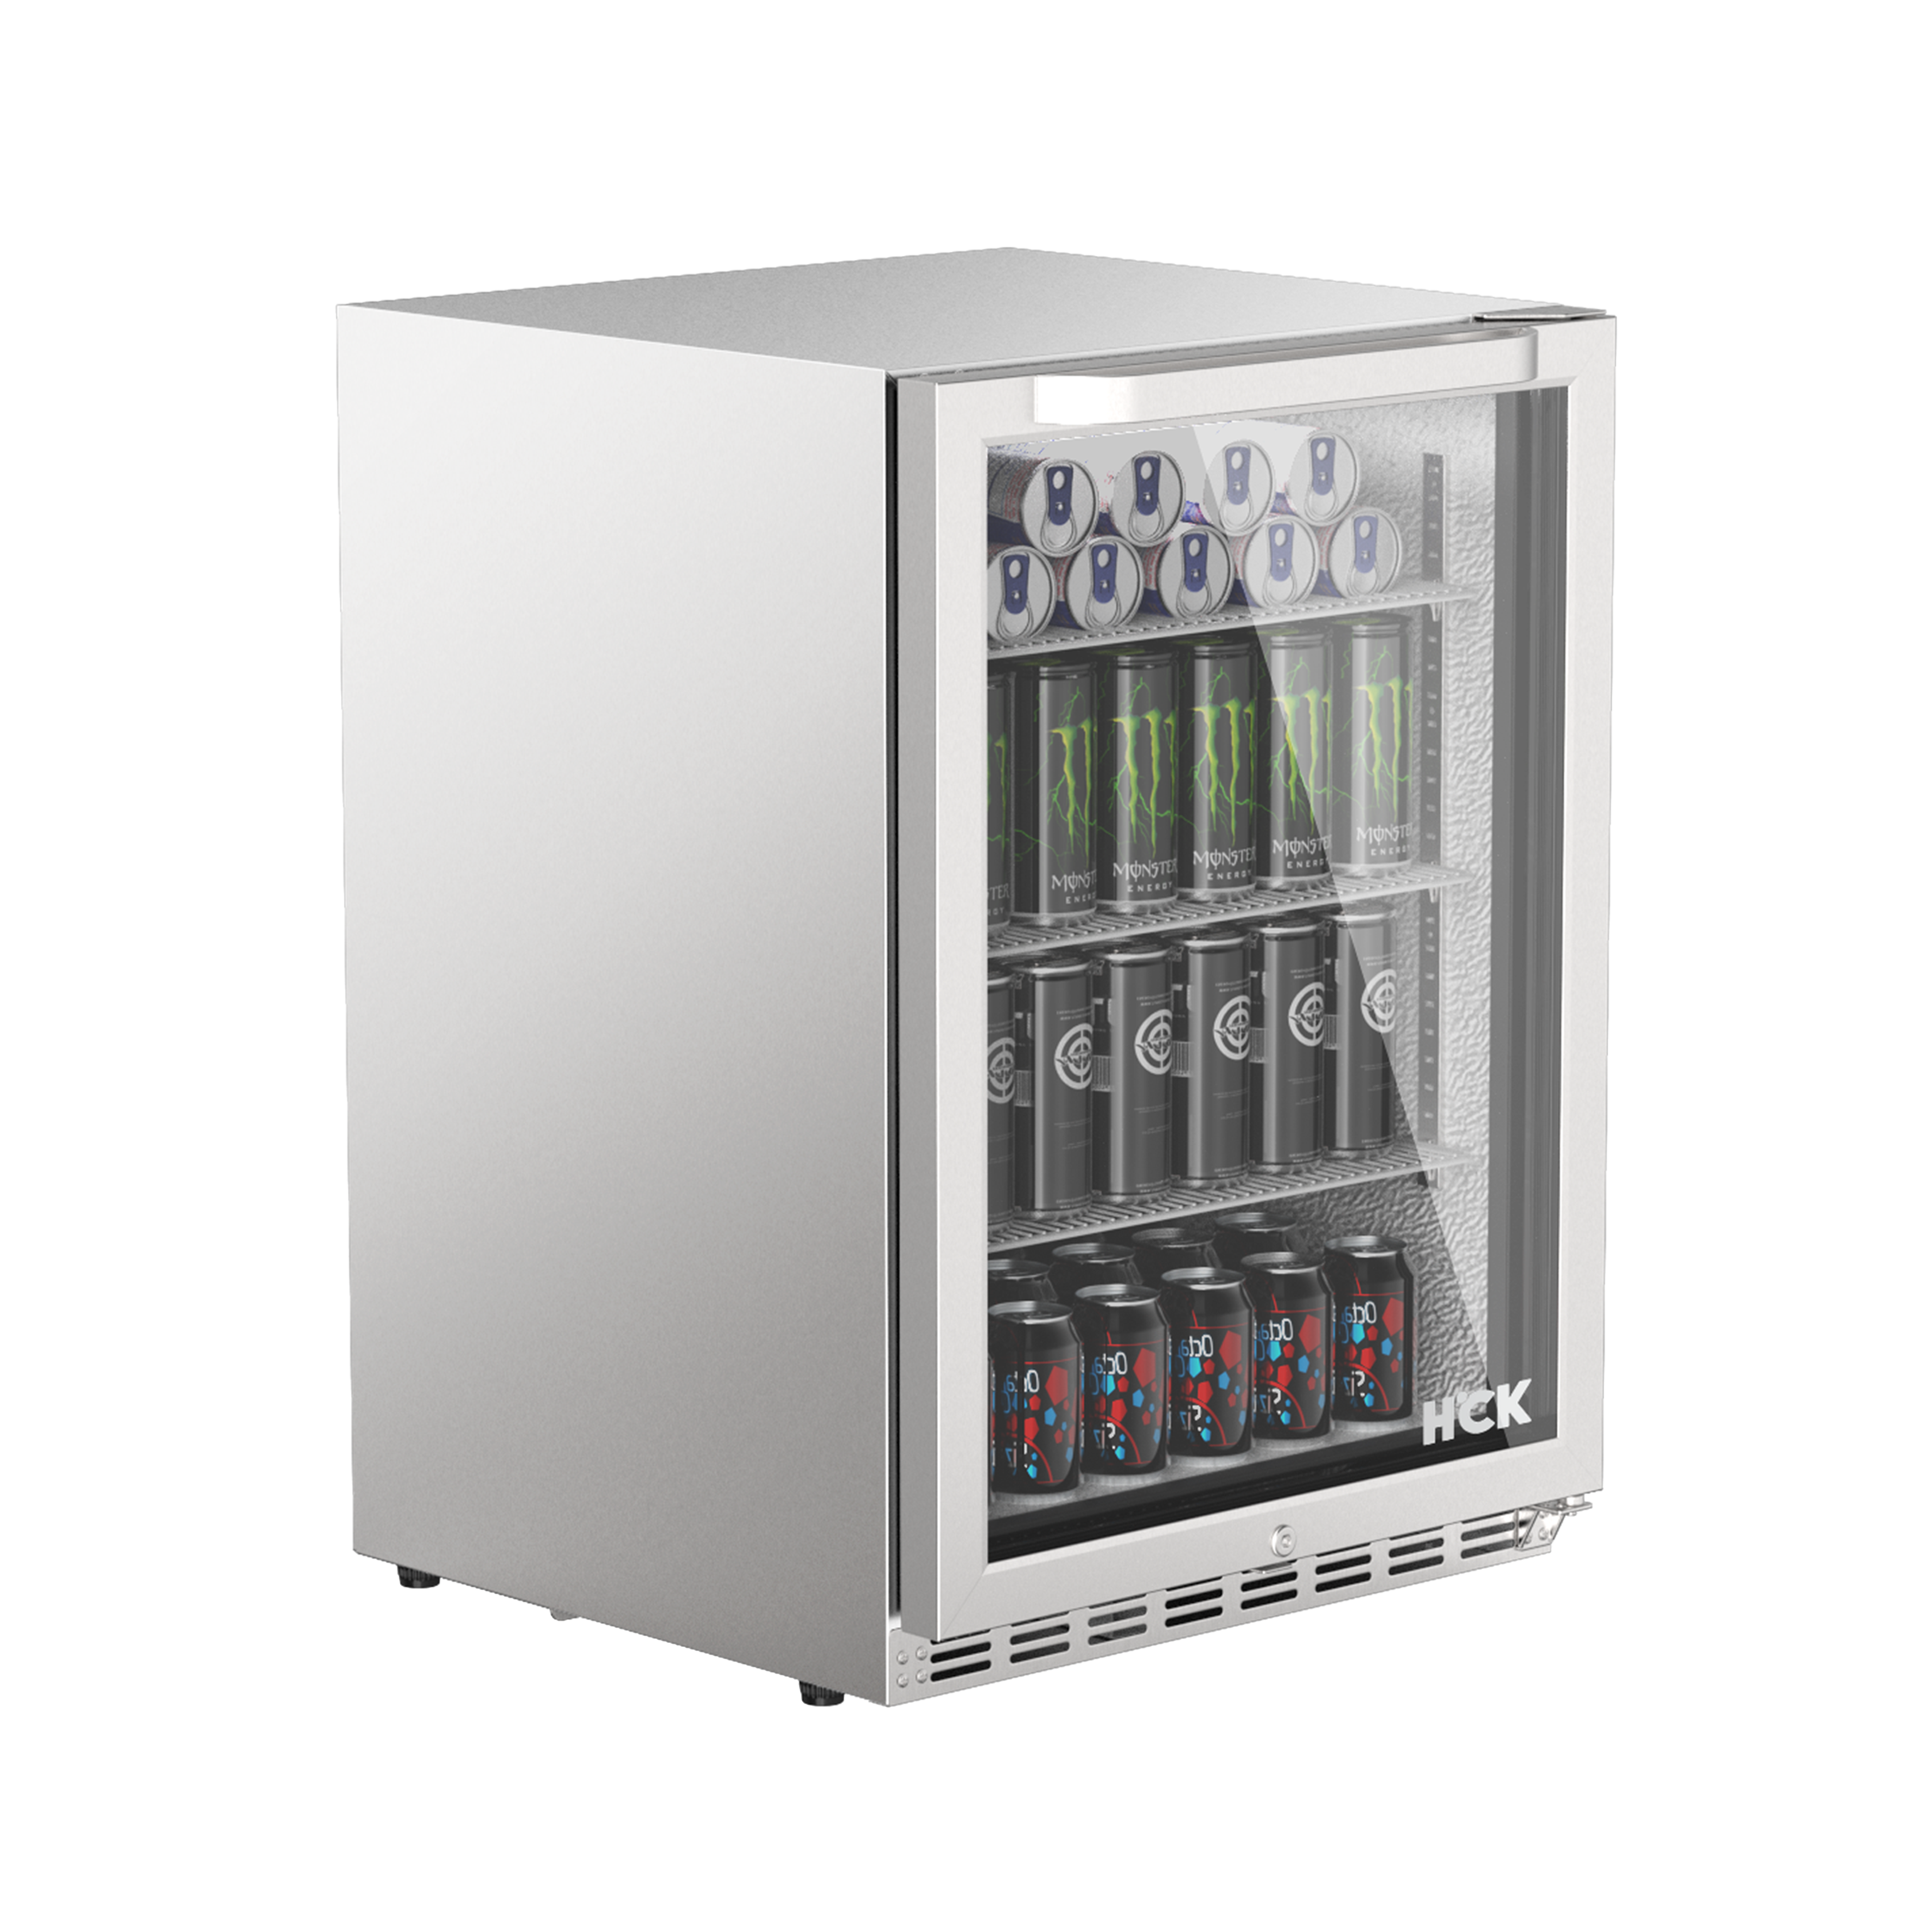 Side view of a 5.12 Cu Ft Beverage Outdoor Refrigerator 132 cans with glass door. The contents of the fridge can be seen through the door